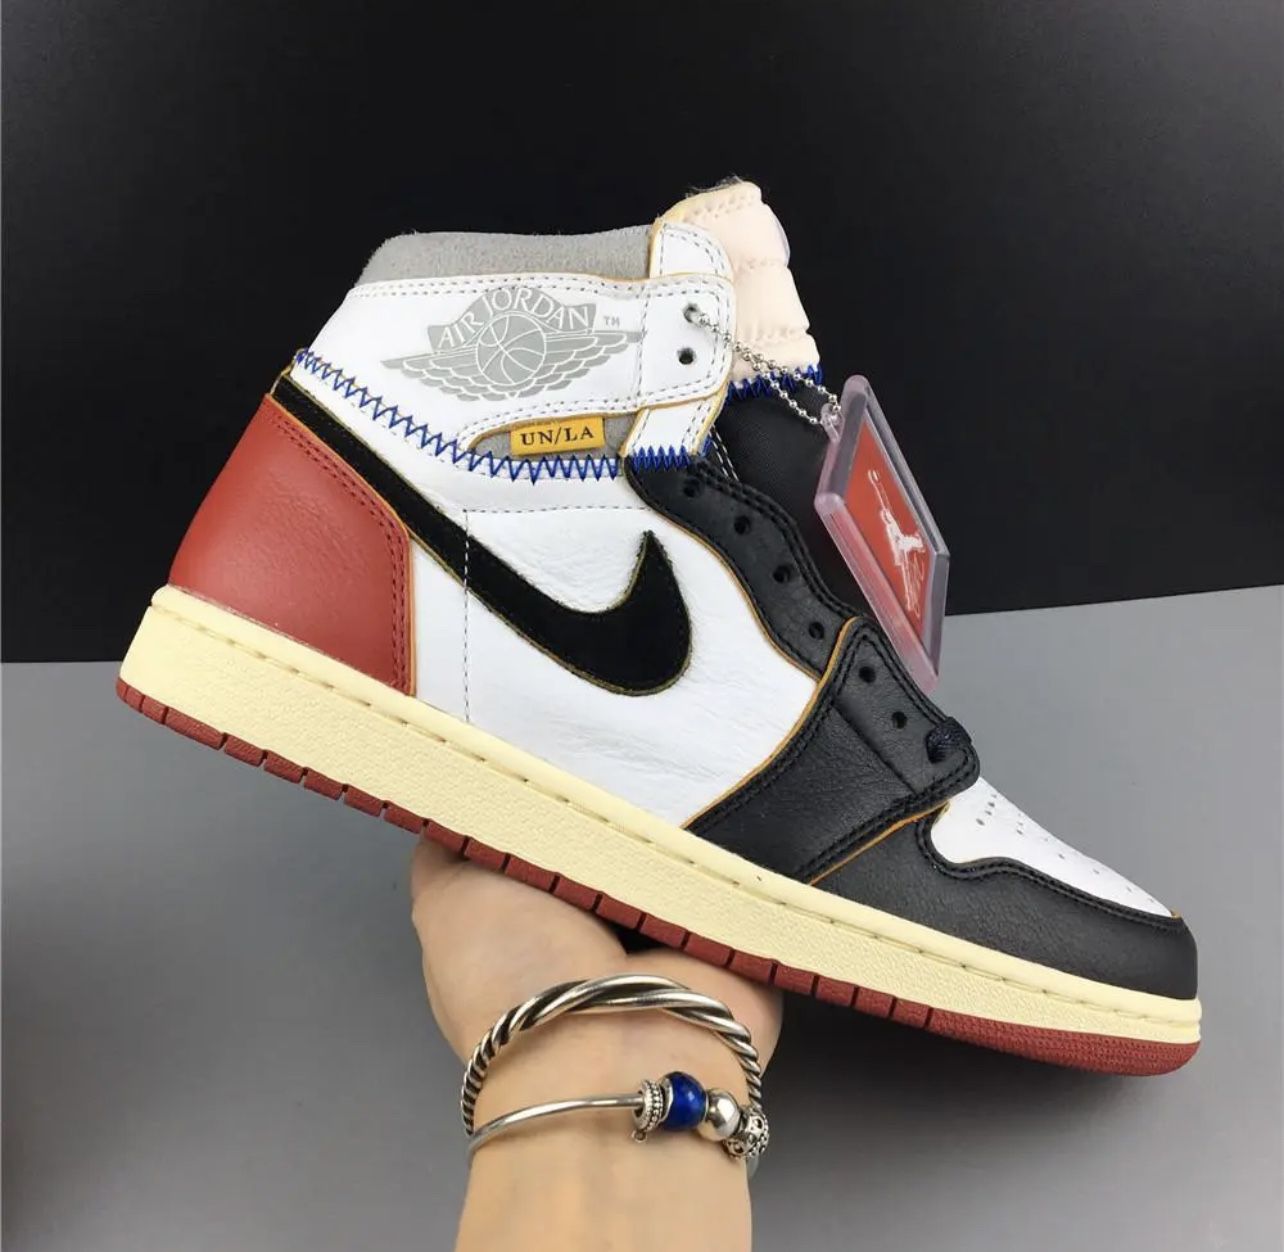 AJ 1 Retro High Union Los Black Toe Shoes Sneakers (Shipping Only) for Sale in New York, NY OfferUp